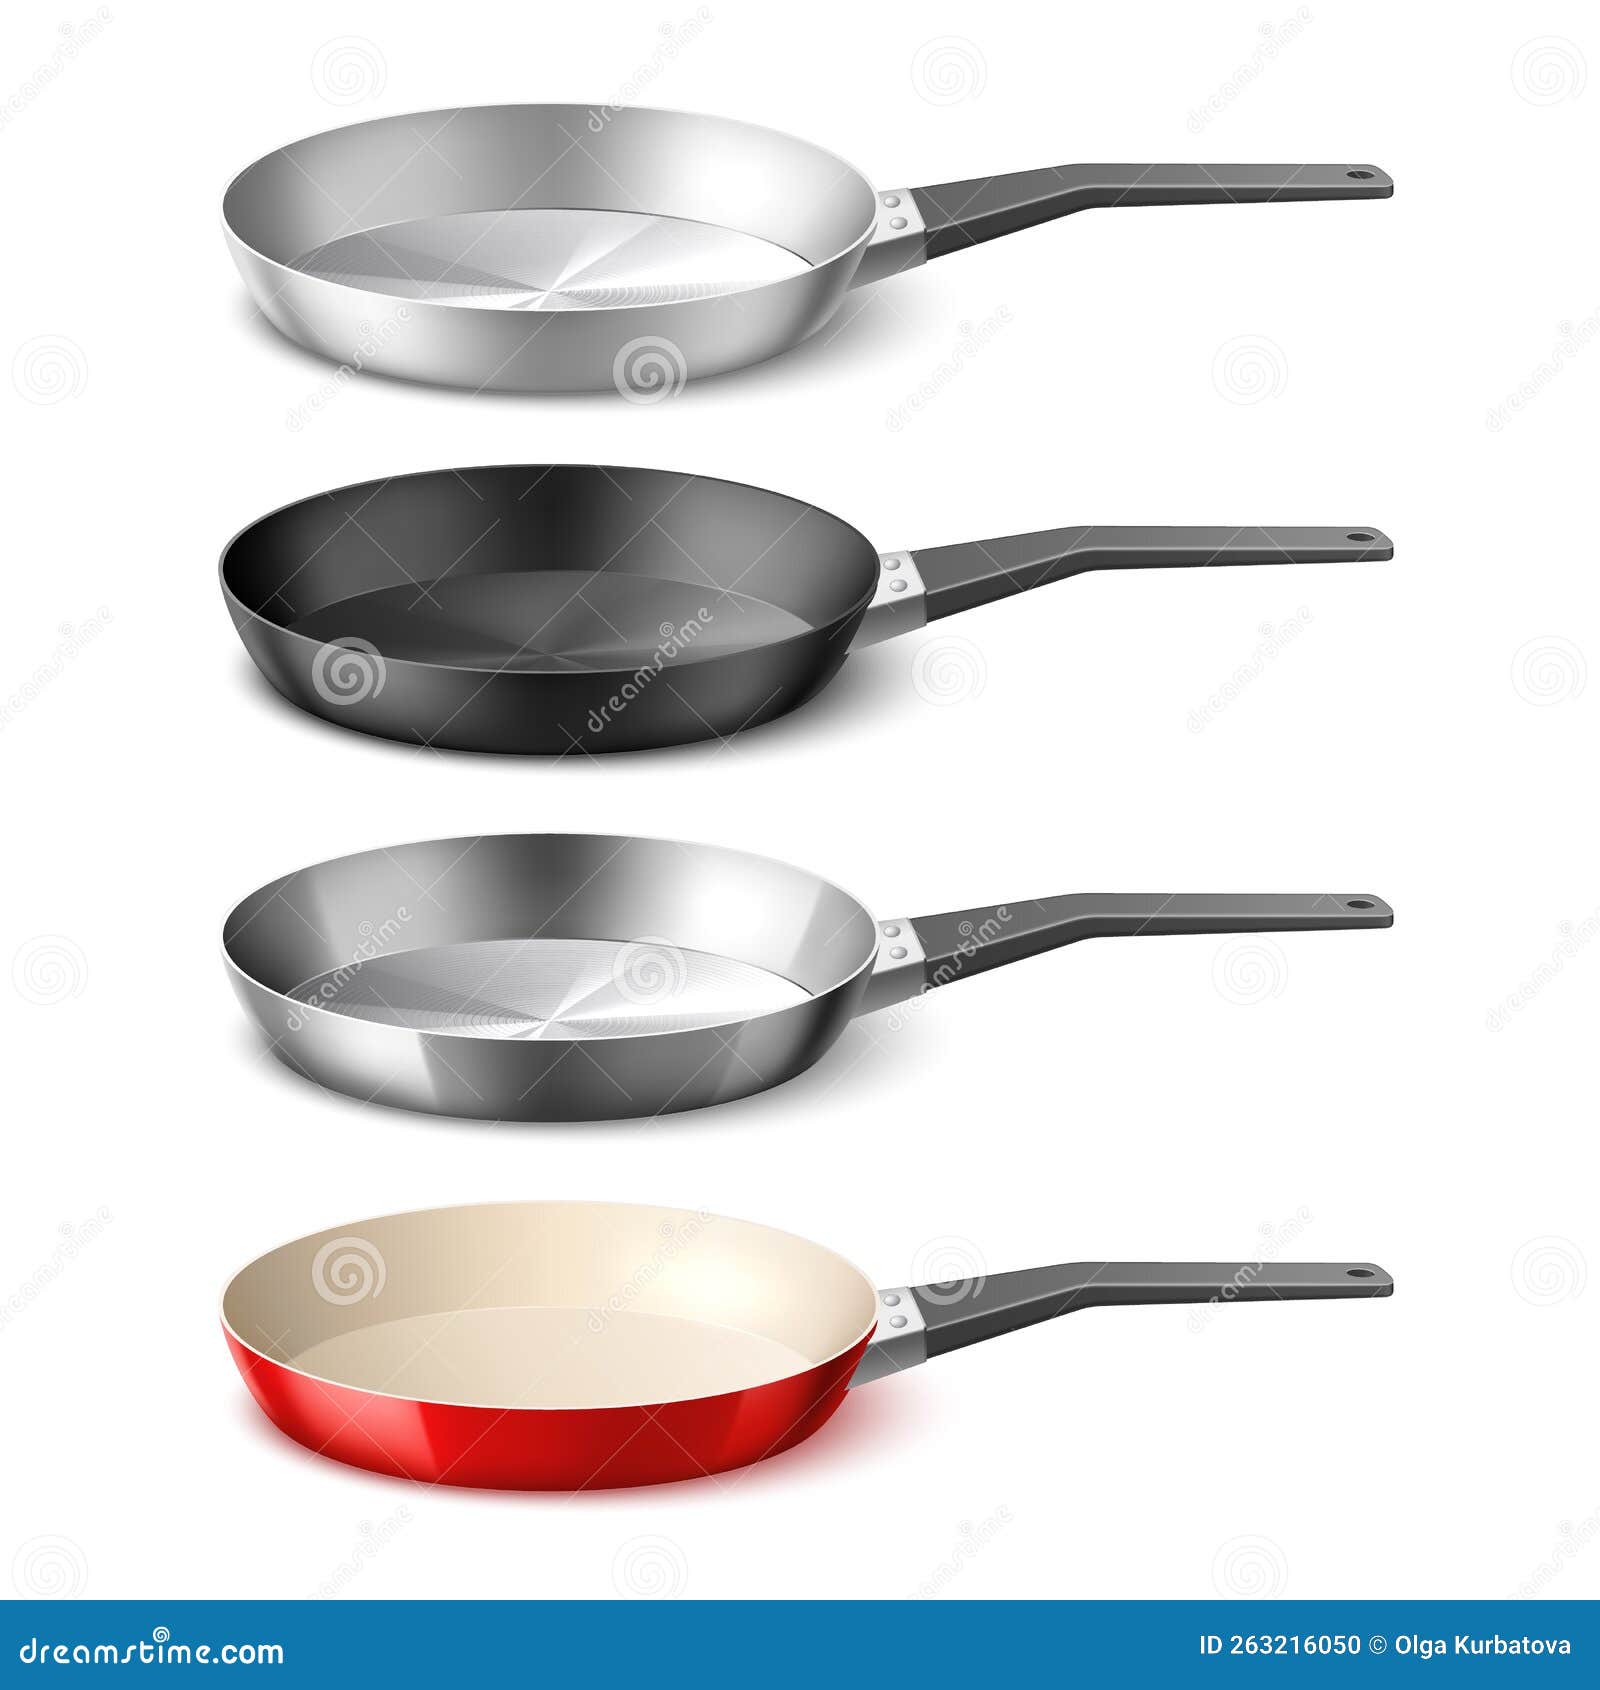 realistic frying pans. 3d dishes with different coatings, metallic cookware, aluminum, teflon, cast iron and steel